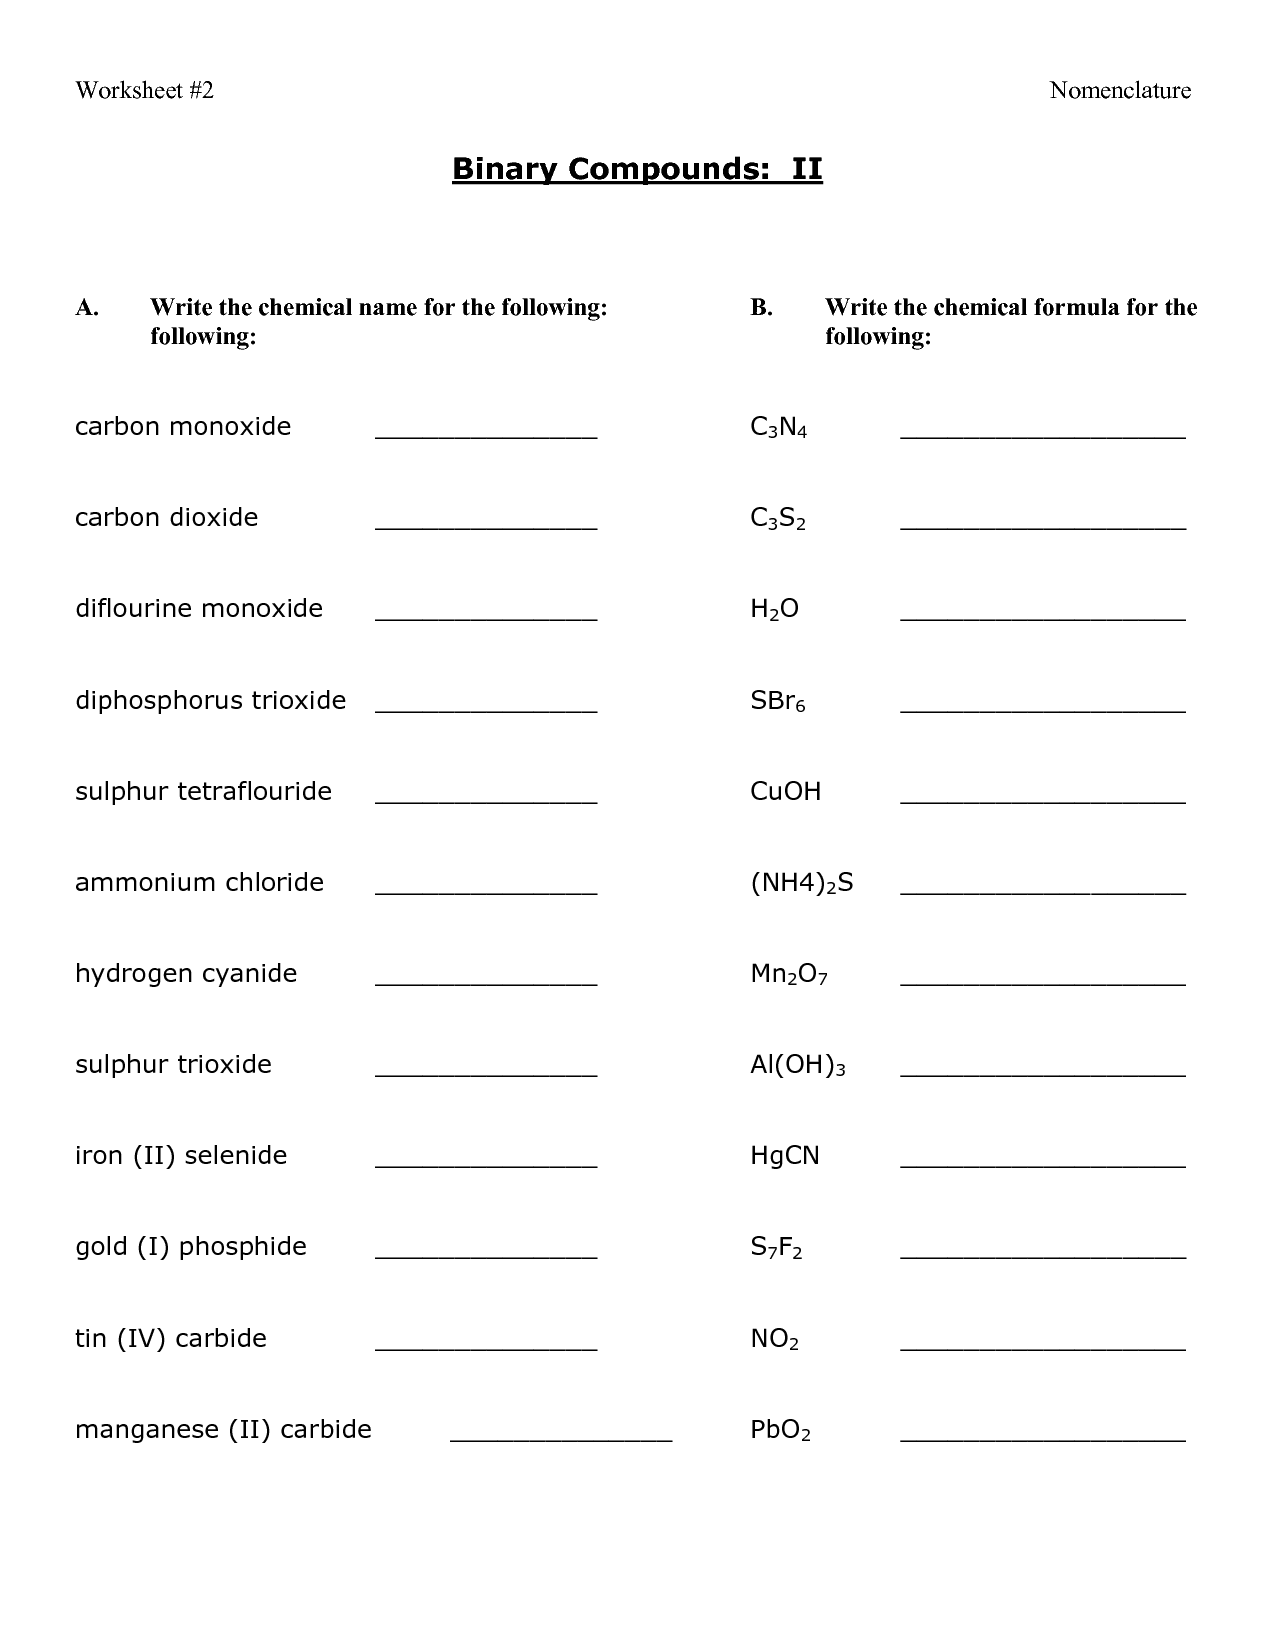 Binary Compounds Worksheet Image